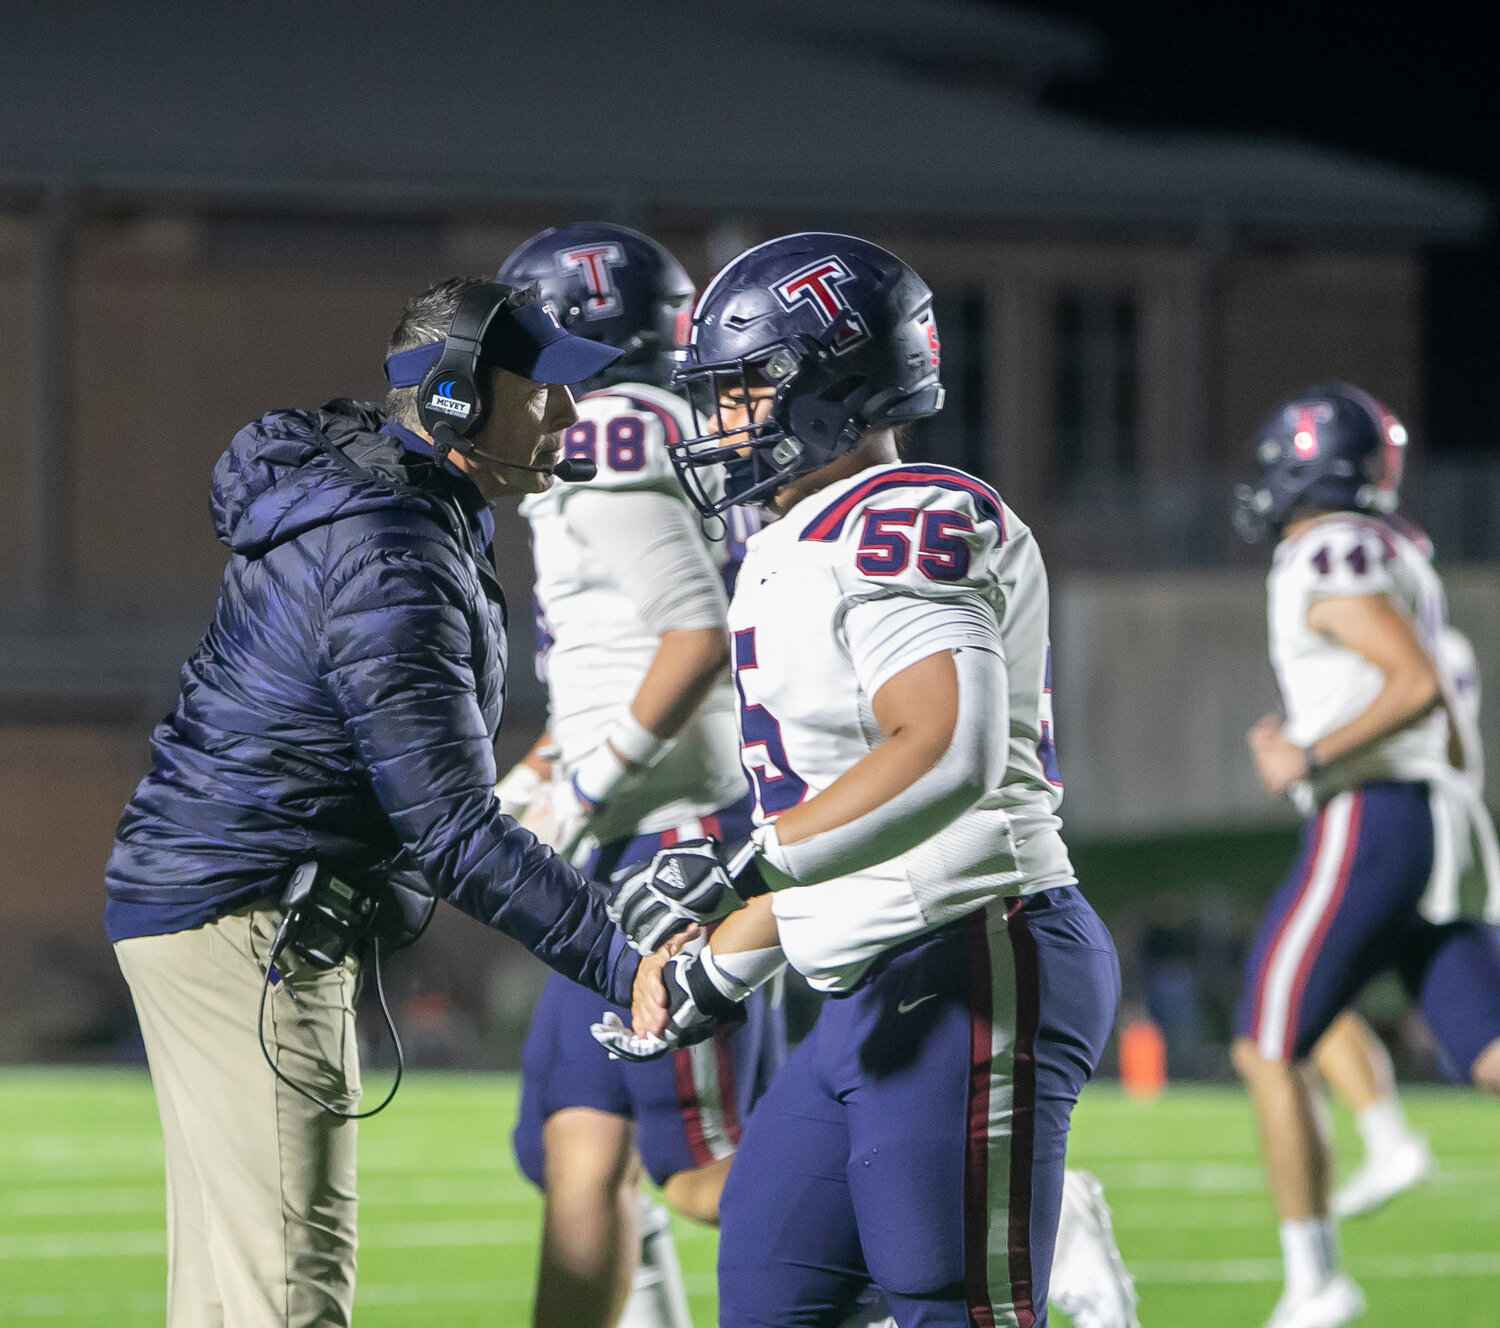 Tompkins head coach Todd McVey celebrate the Tompkins offense after a touchdown during Friday's game between Tompkins and Ridge Point at Hall Stadium.